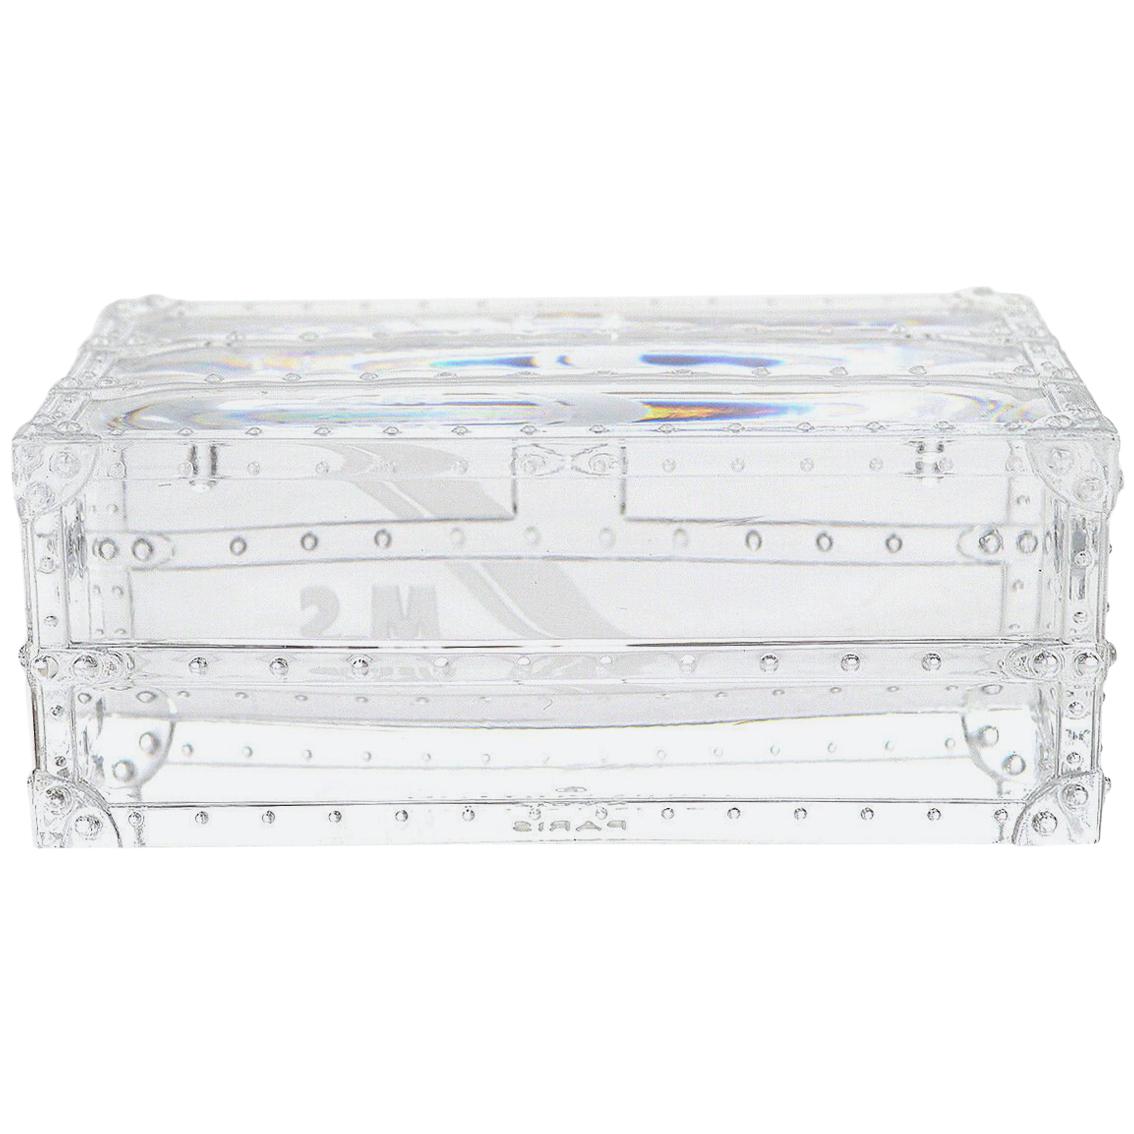 Louis Vuitton NEW Clear Crystal Trunk Desk Table Decorative Paperweight in Box